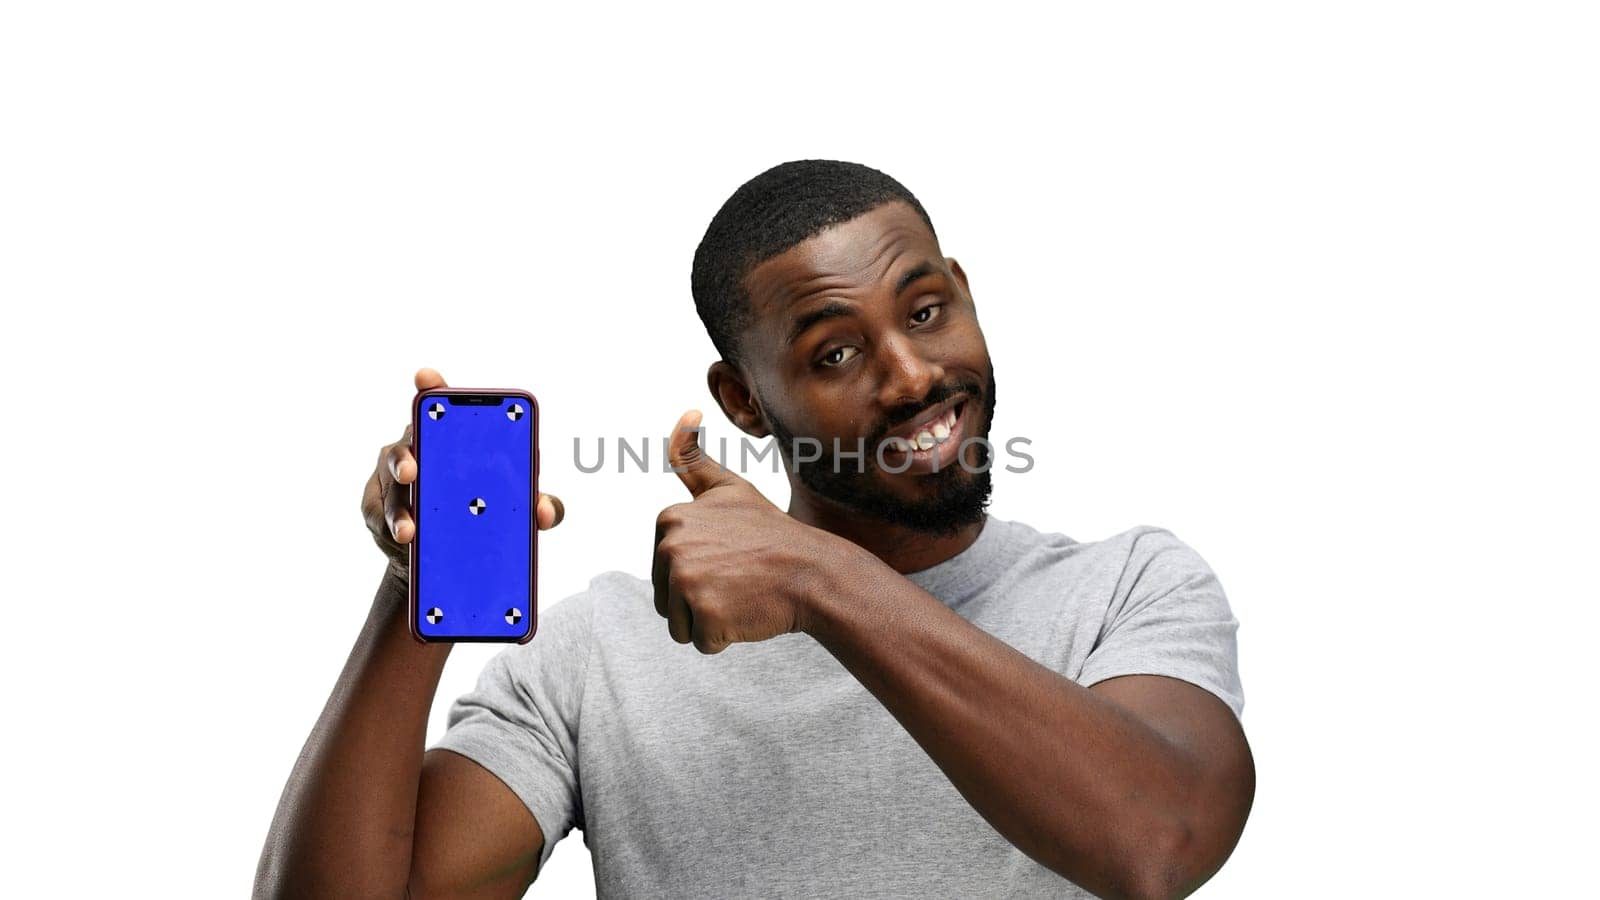 A man, close-up, on a white background, shows a phone.